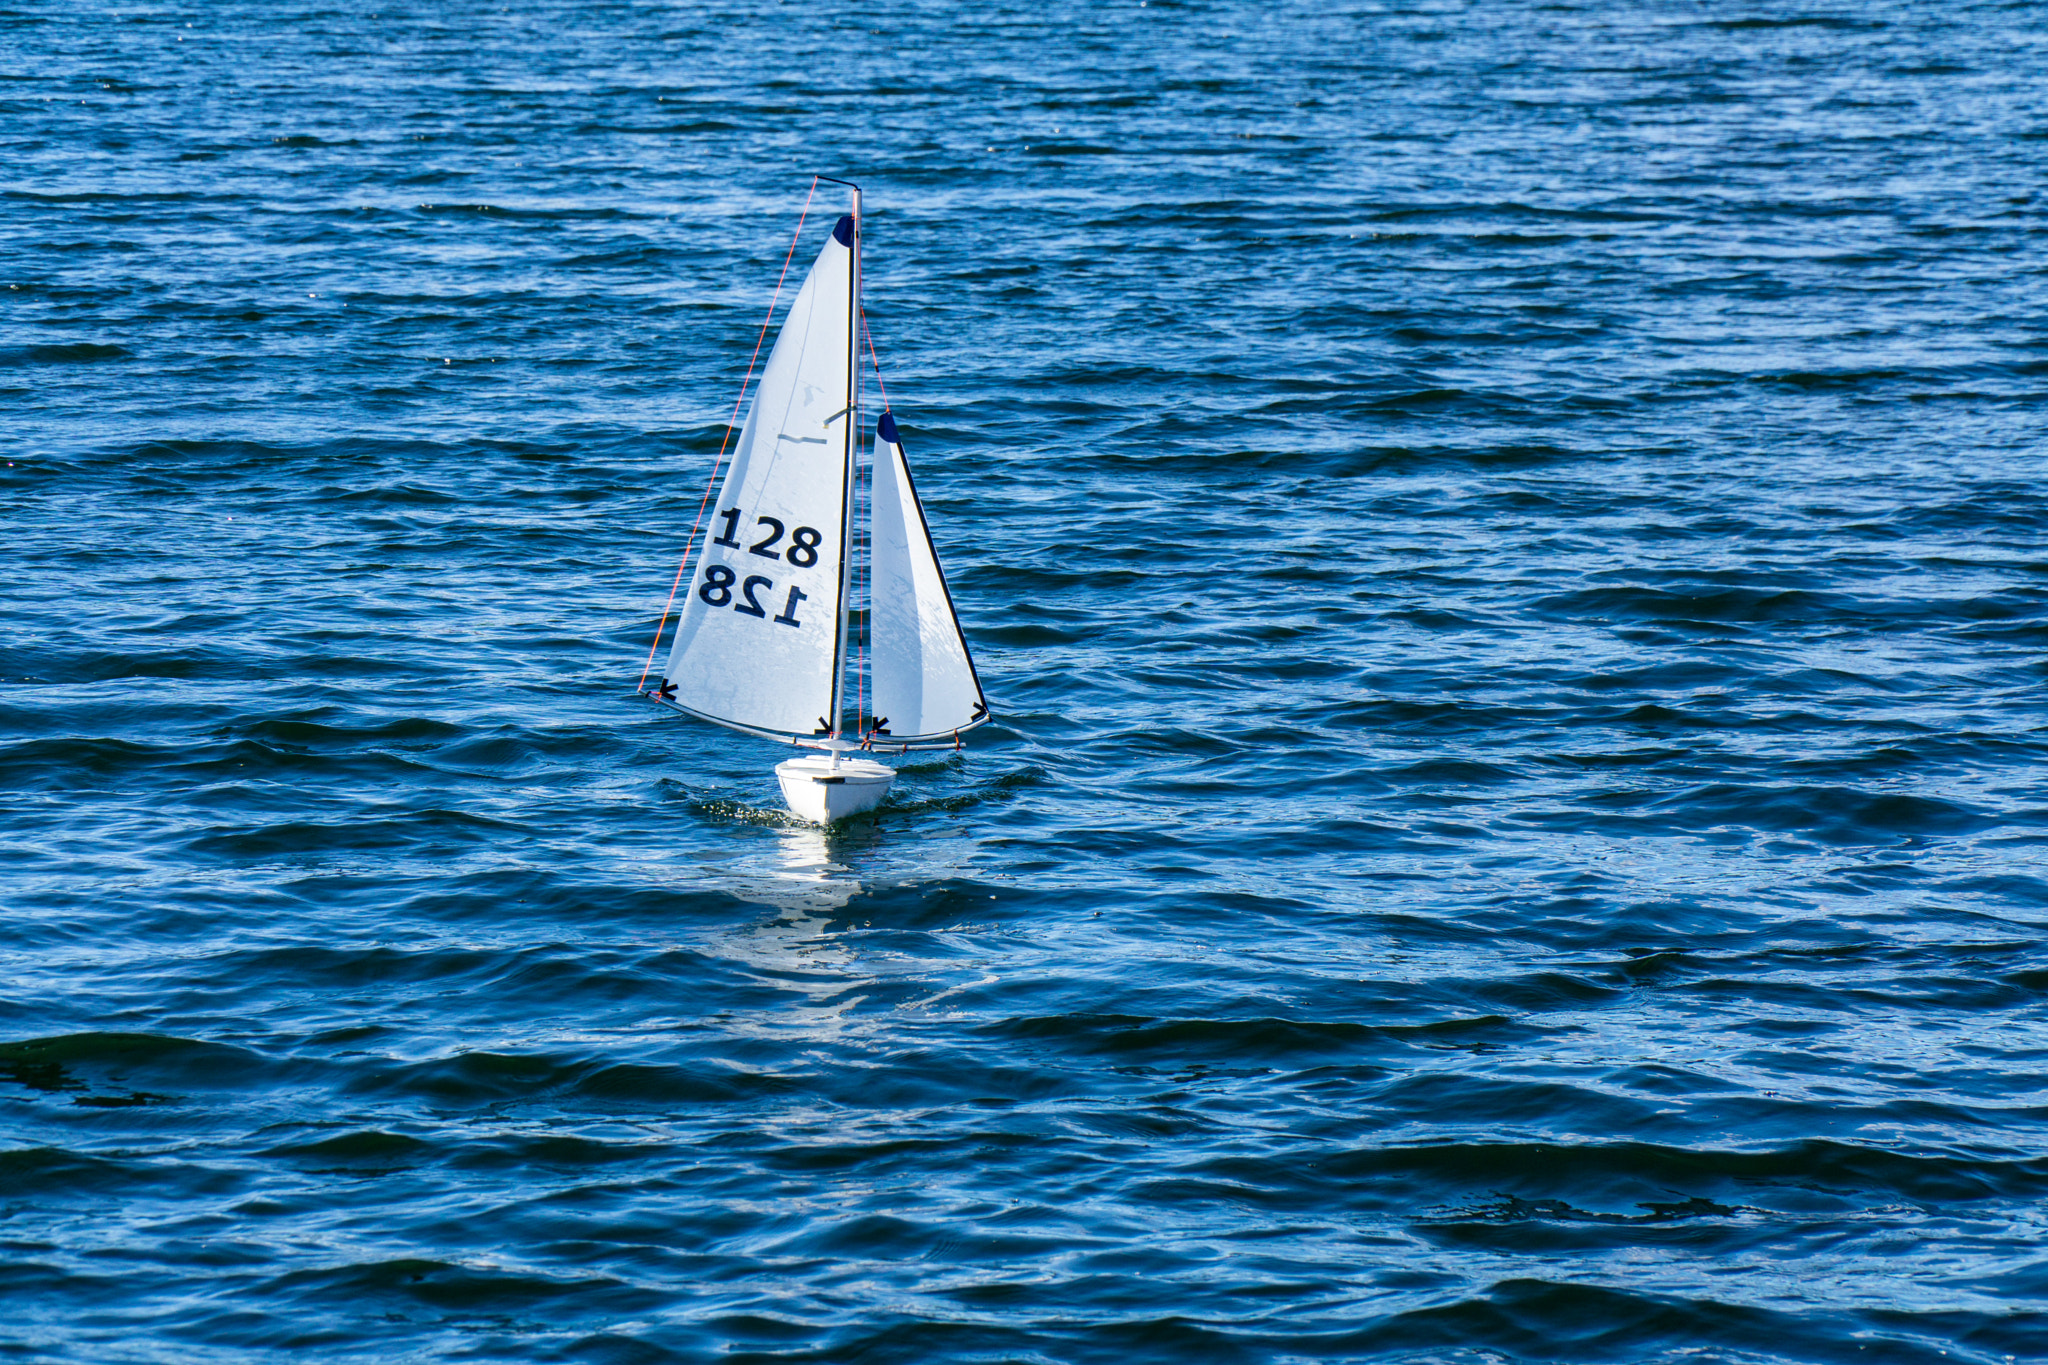 Remote controlled sailboat